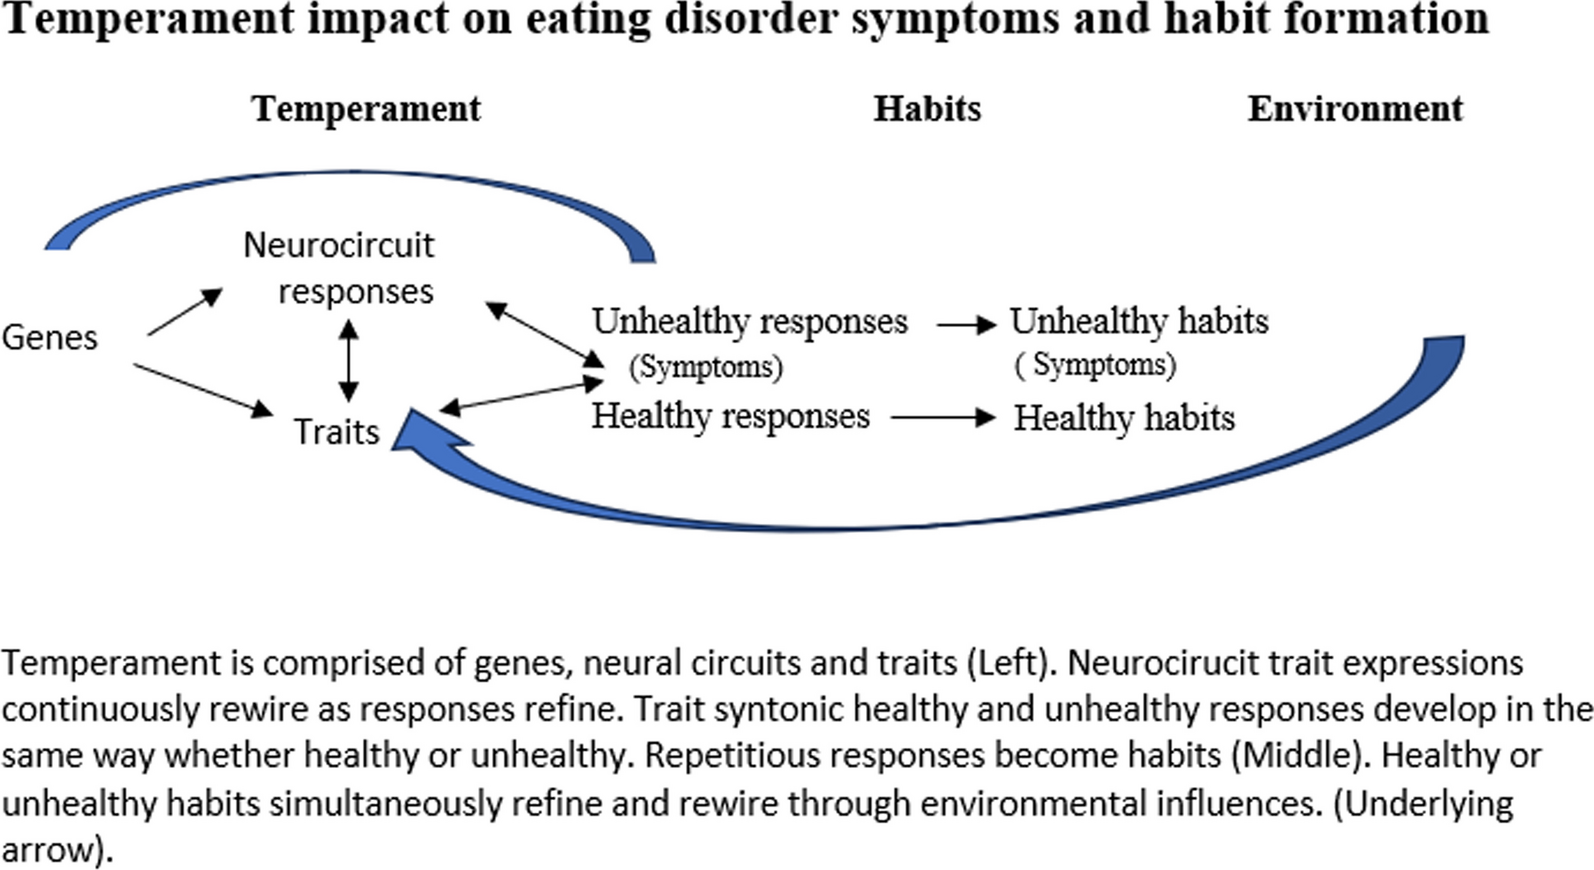 Temperament impact on eating disorder symptoms and habit formation: a novel model to inform treatment